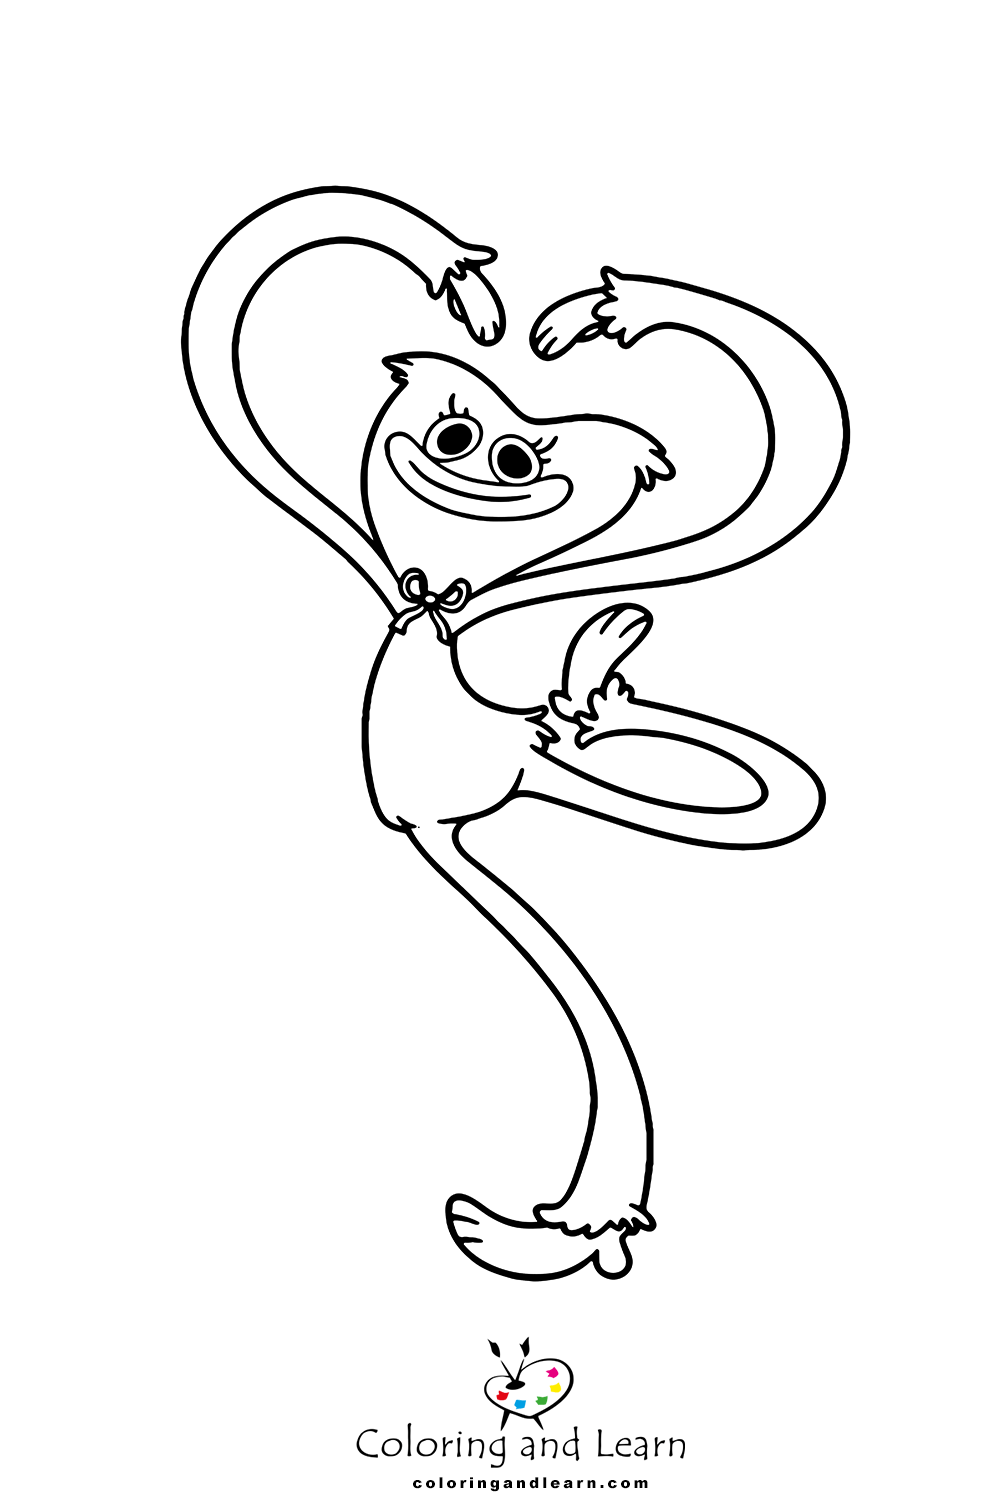 Free Printable Huggy Wuggy Coloring Pages for Adults and Kids